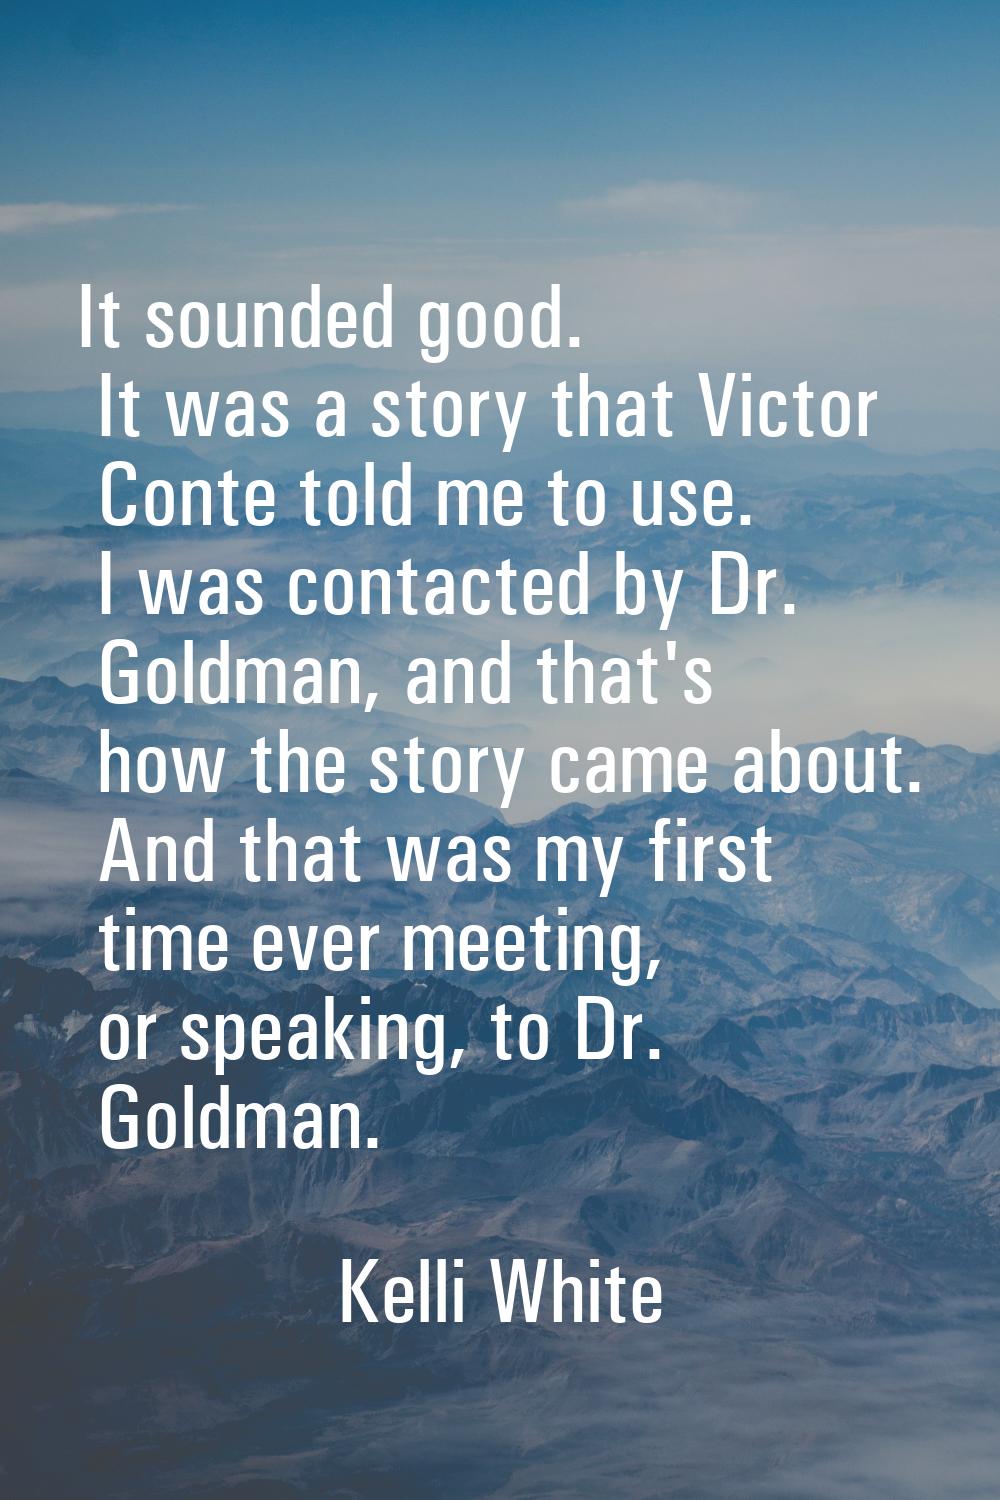 It sounded good. It was a story that Victor Conte told me to use. I was contacted by Dr. Goldman, a